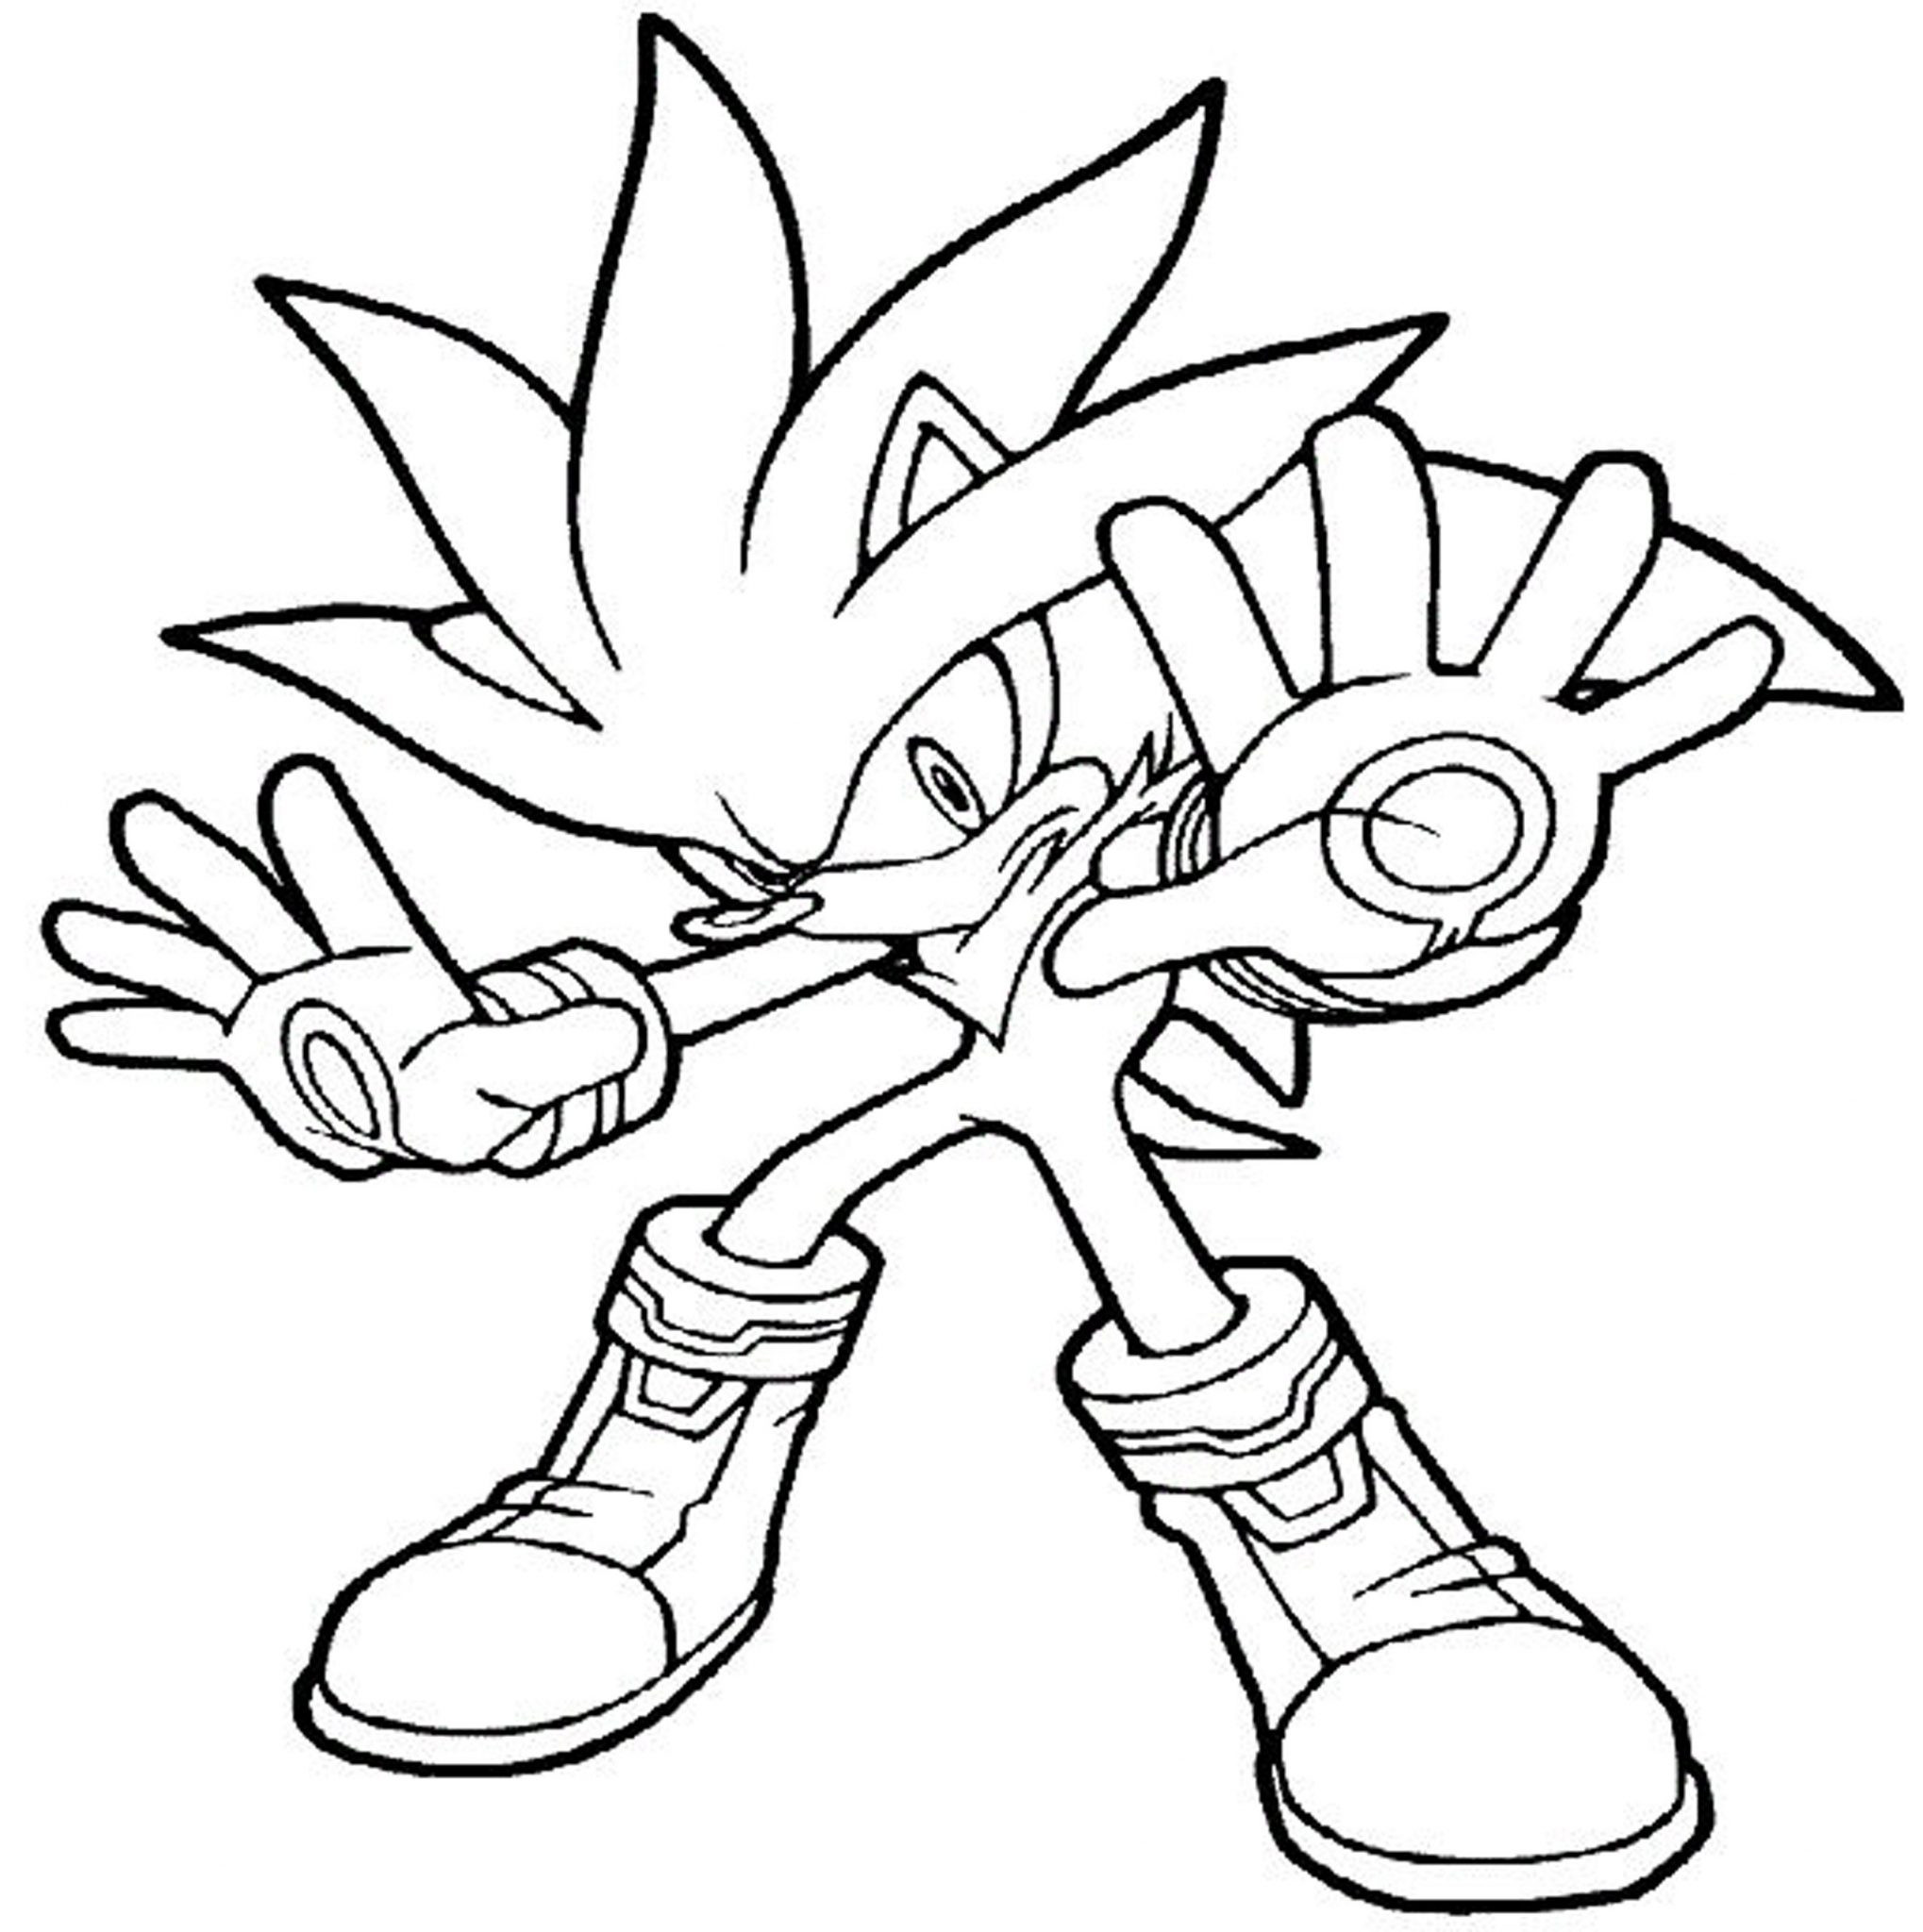 Free Coloring Pages For Boys
 printable coloring pages for boys sonic